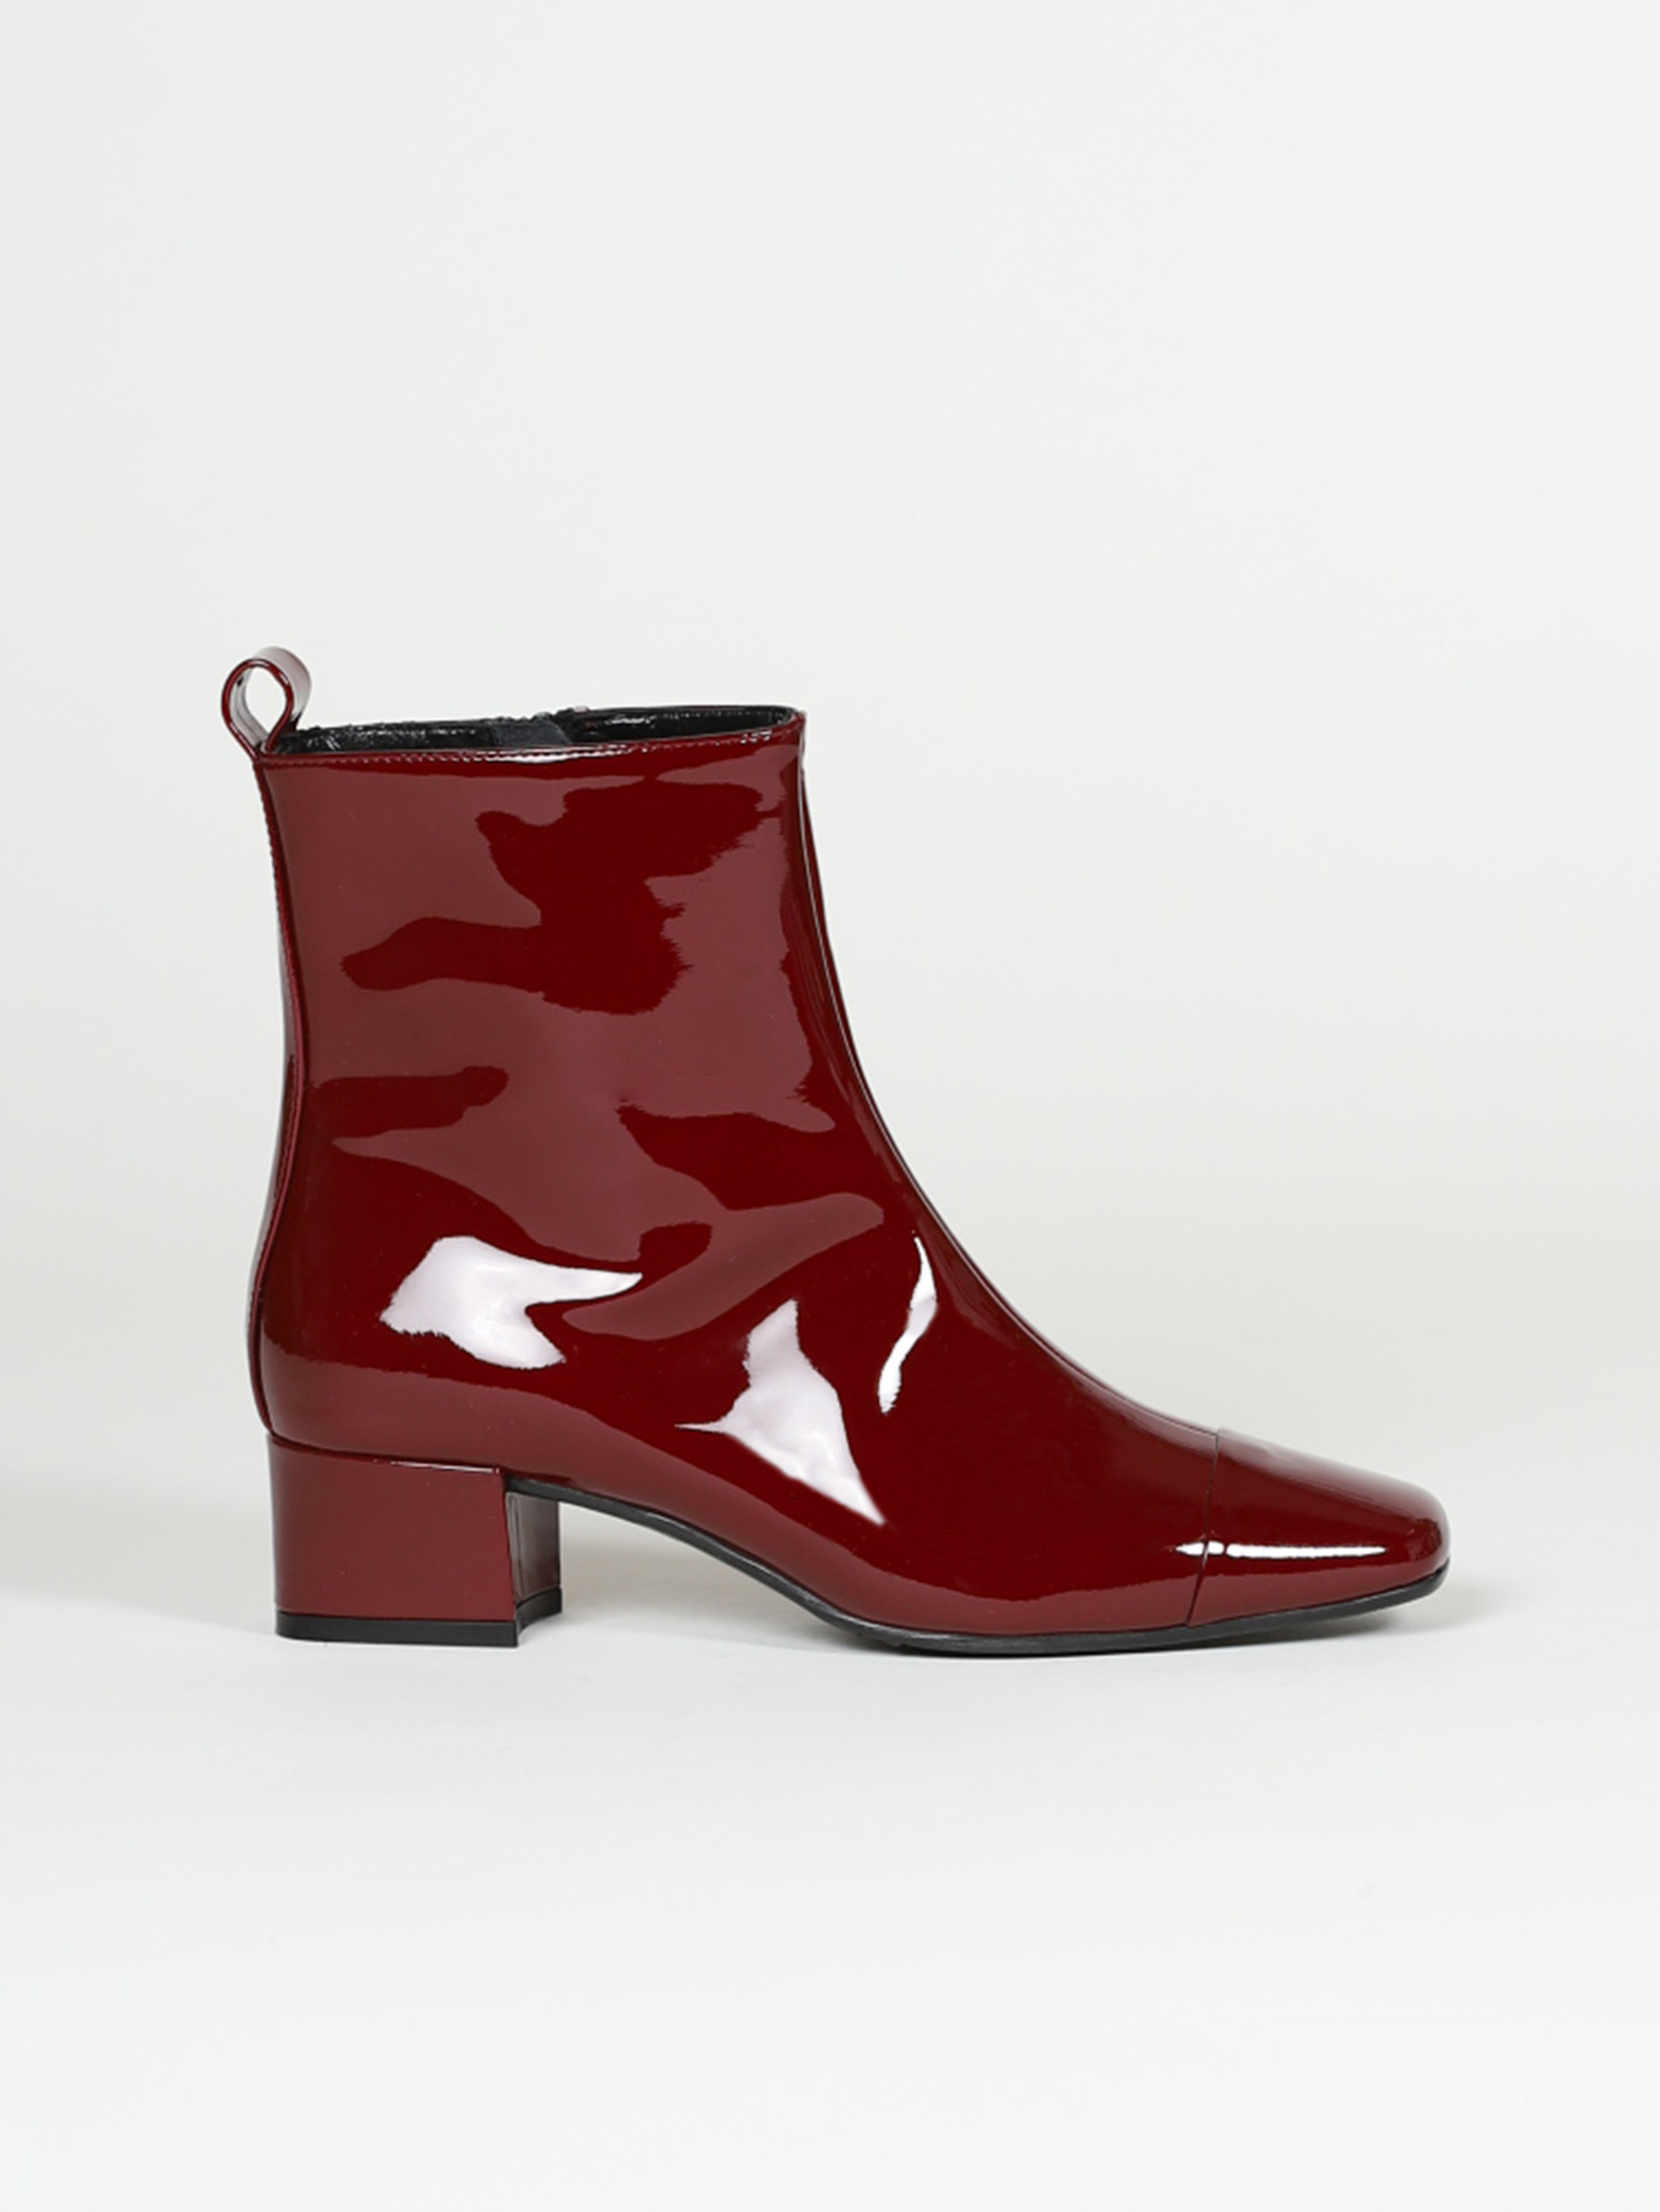 Burgundy patent leather ankle boots